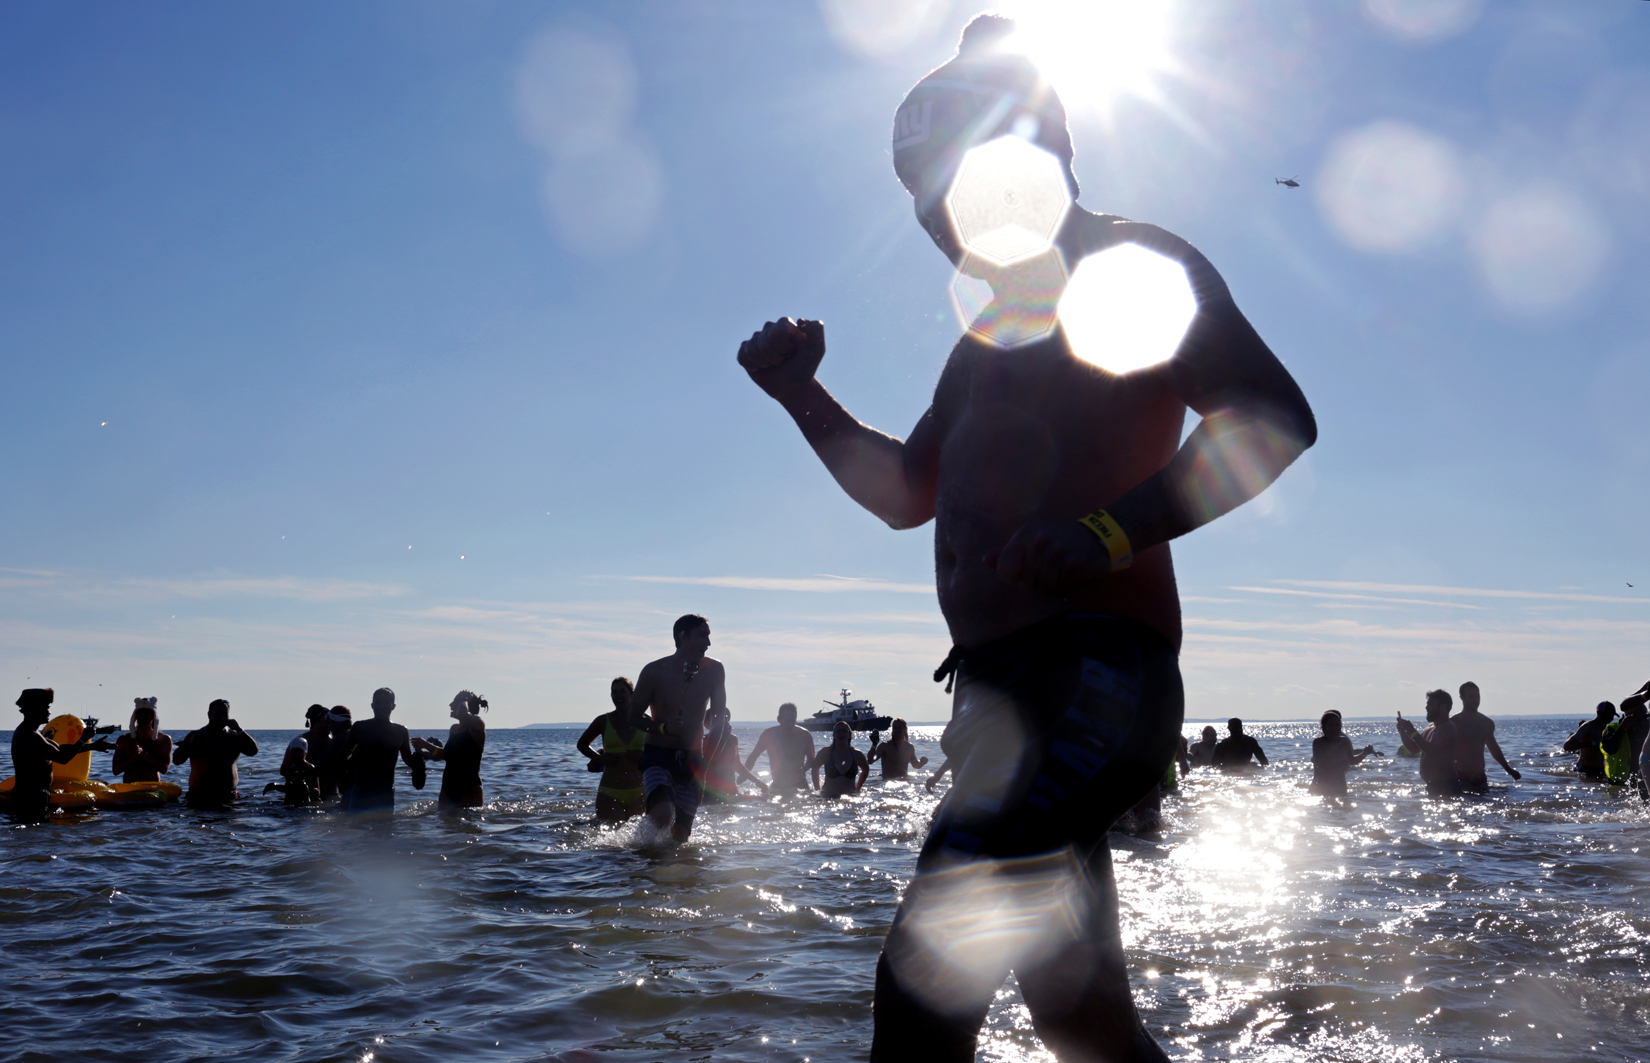 Swimmers run into the ocean during Coney Island Polar Bear Club's New Year's Day Plunge on January 01, 2017 in Brooklyn, NY.